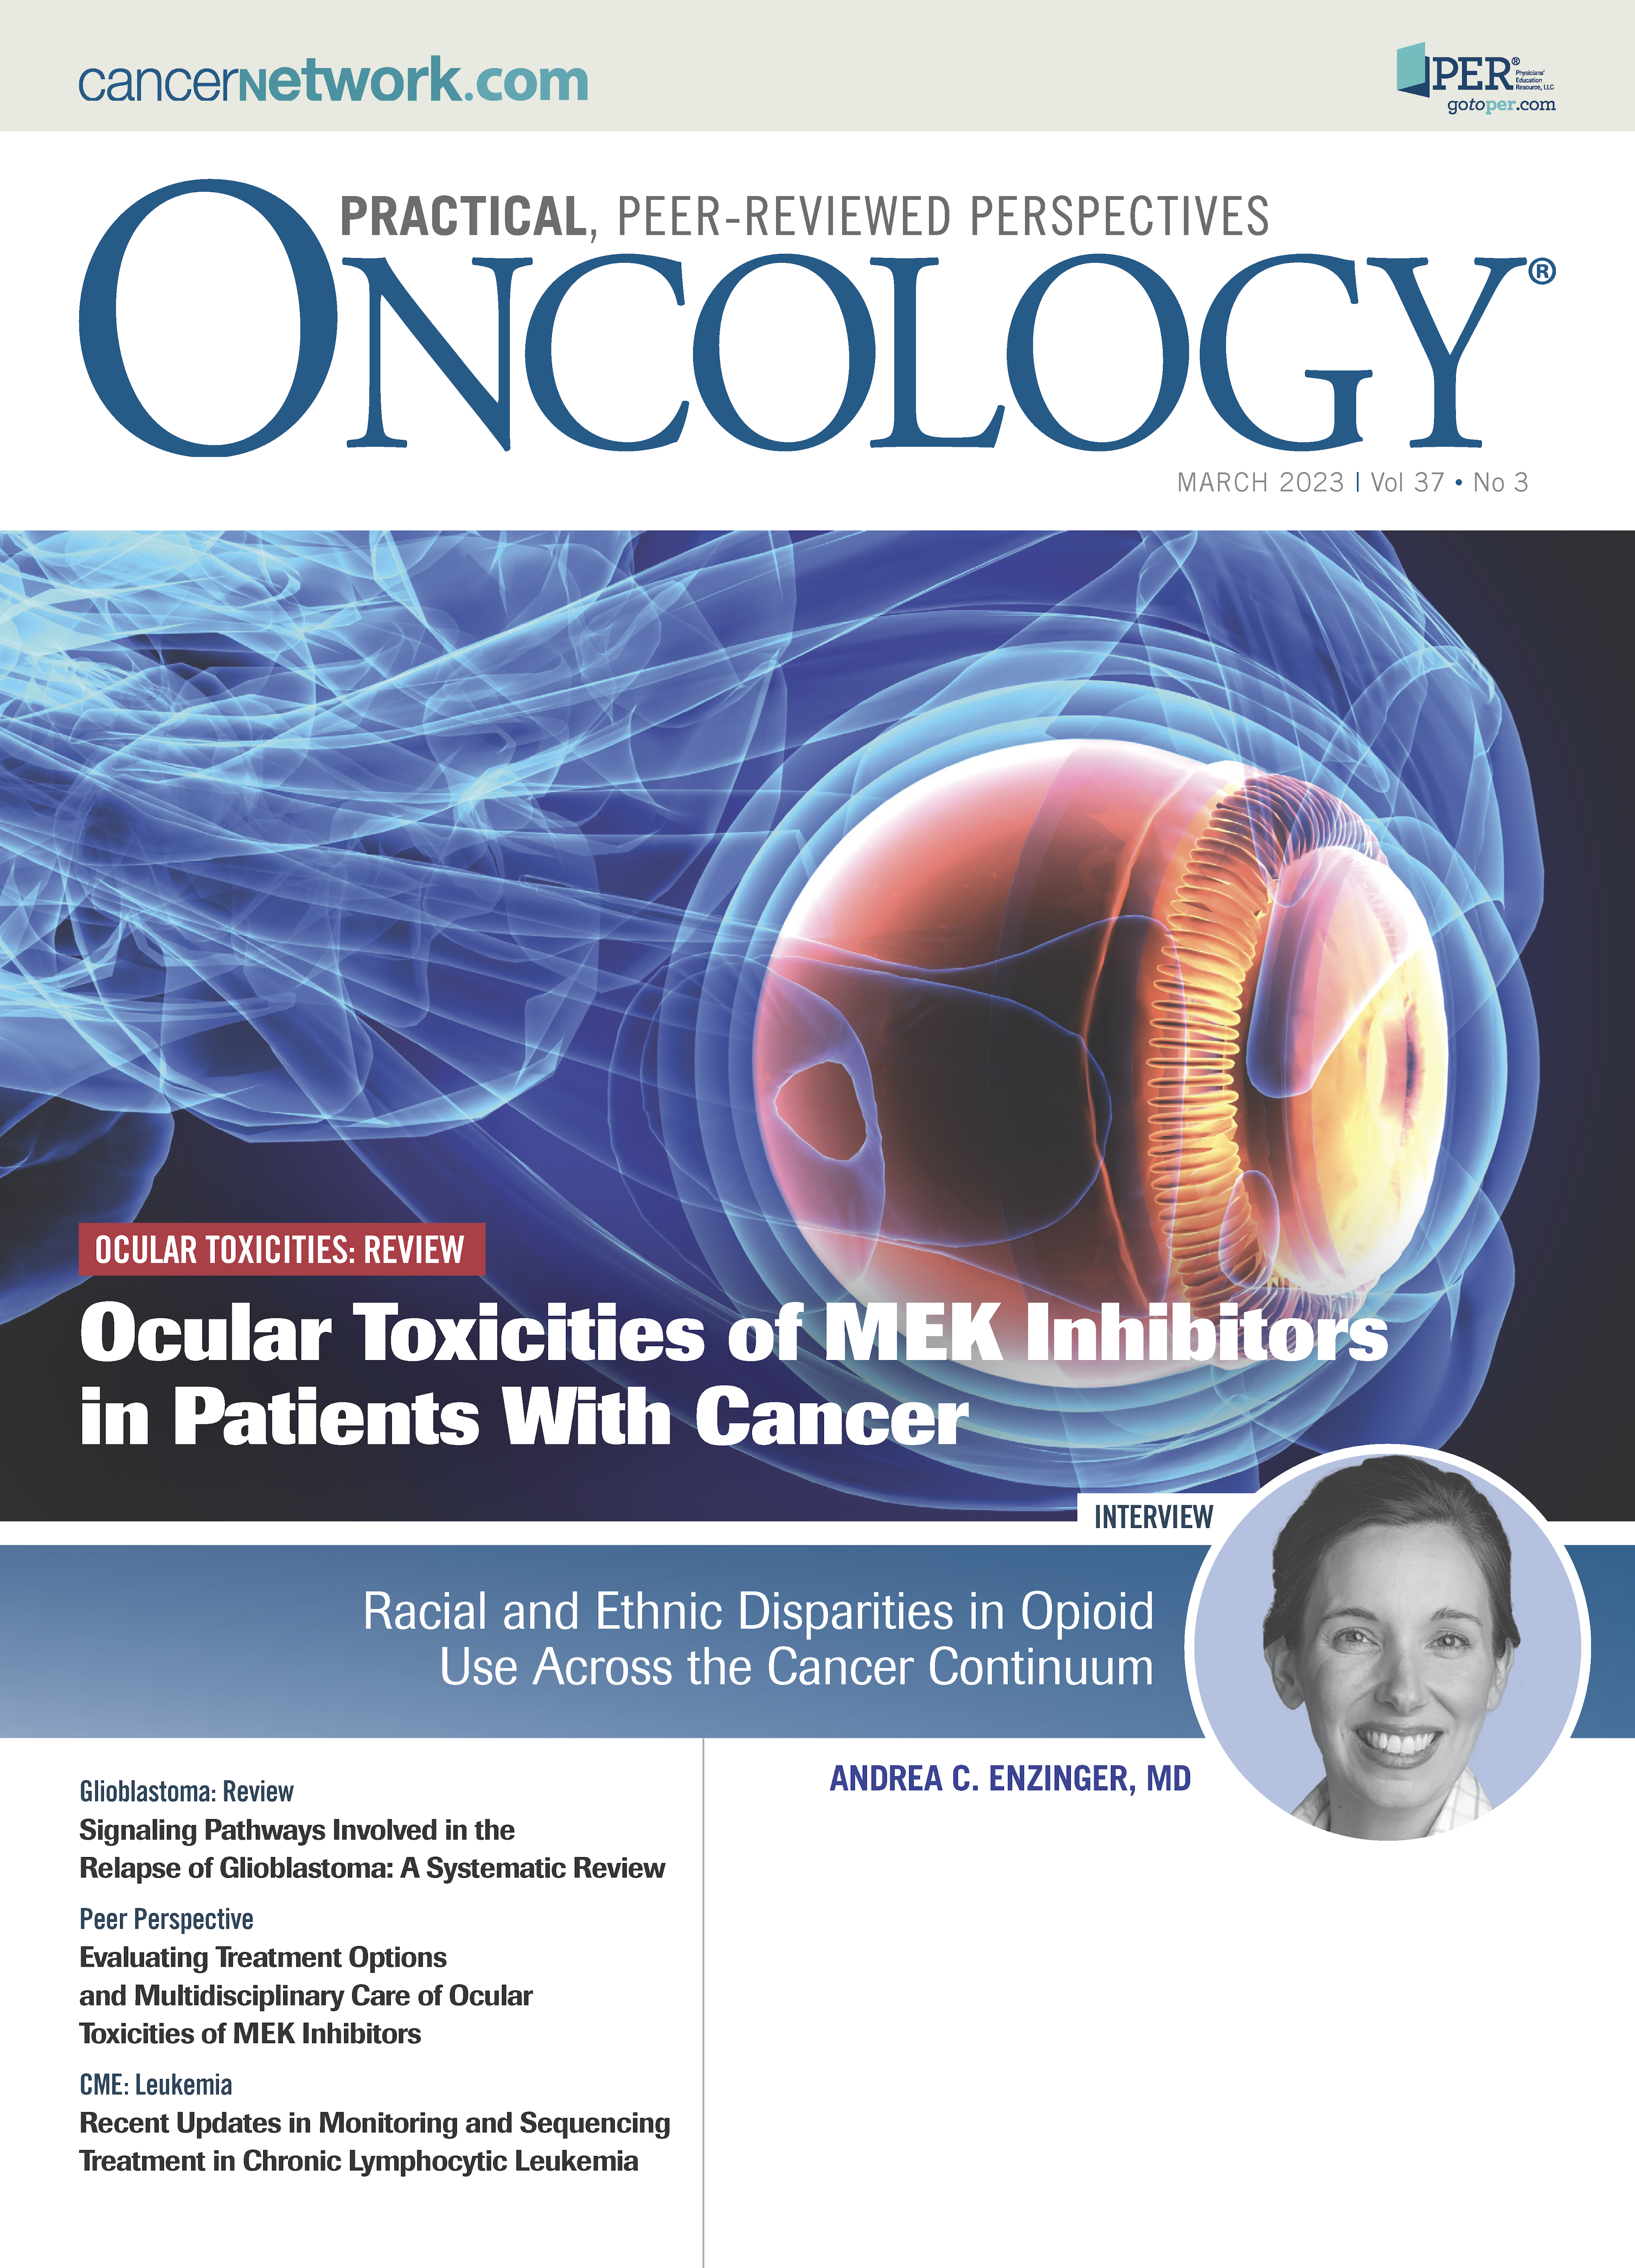 ONCOLOGY Vol 37, Issue 3